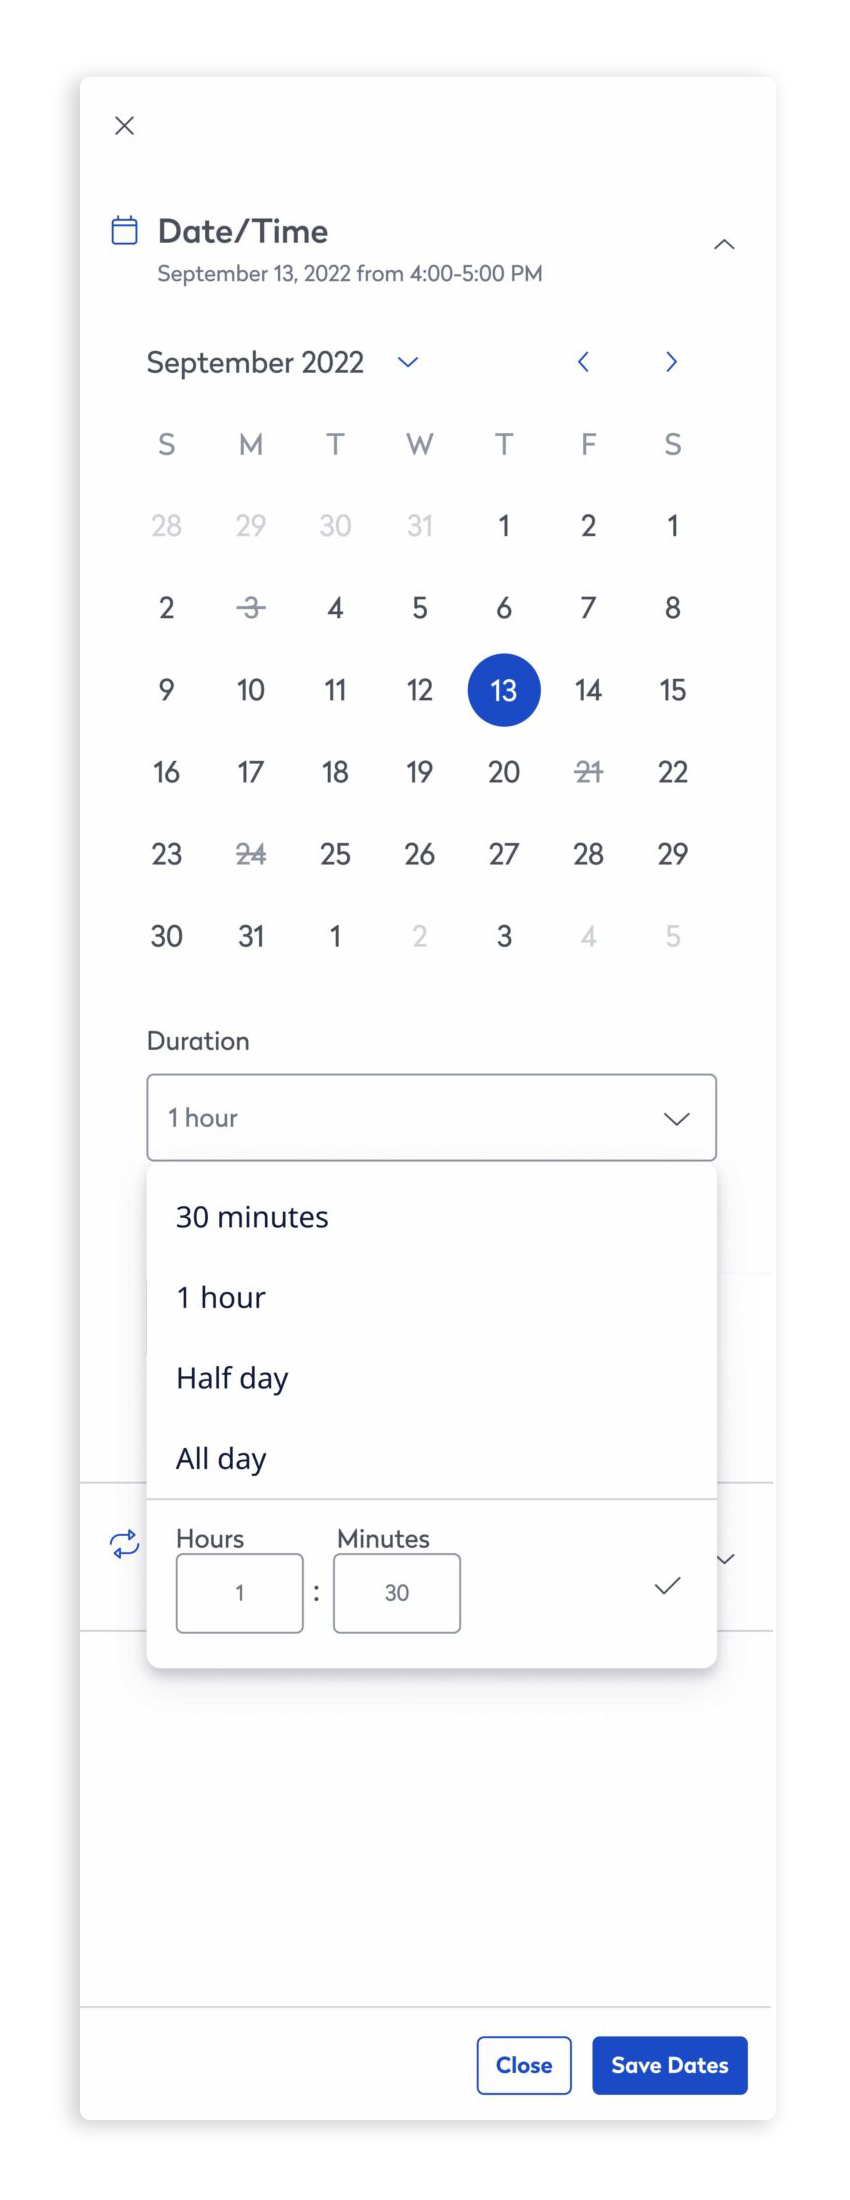 These meeting duration options are based on research findings of the most booked time blocks for meeting rooms and desks. The meeting duration selected will influence what times are shown as open in the available times section.